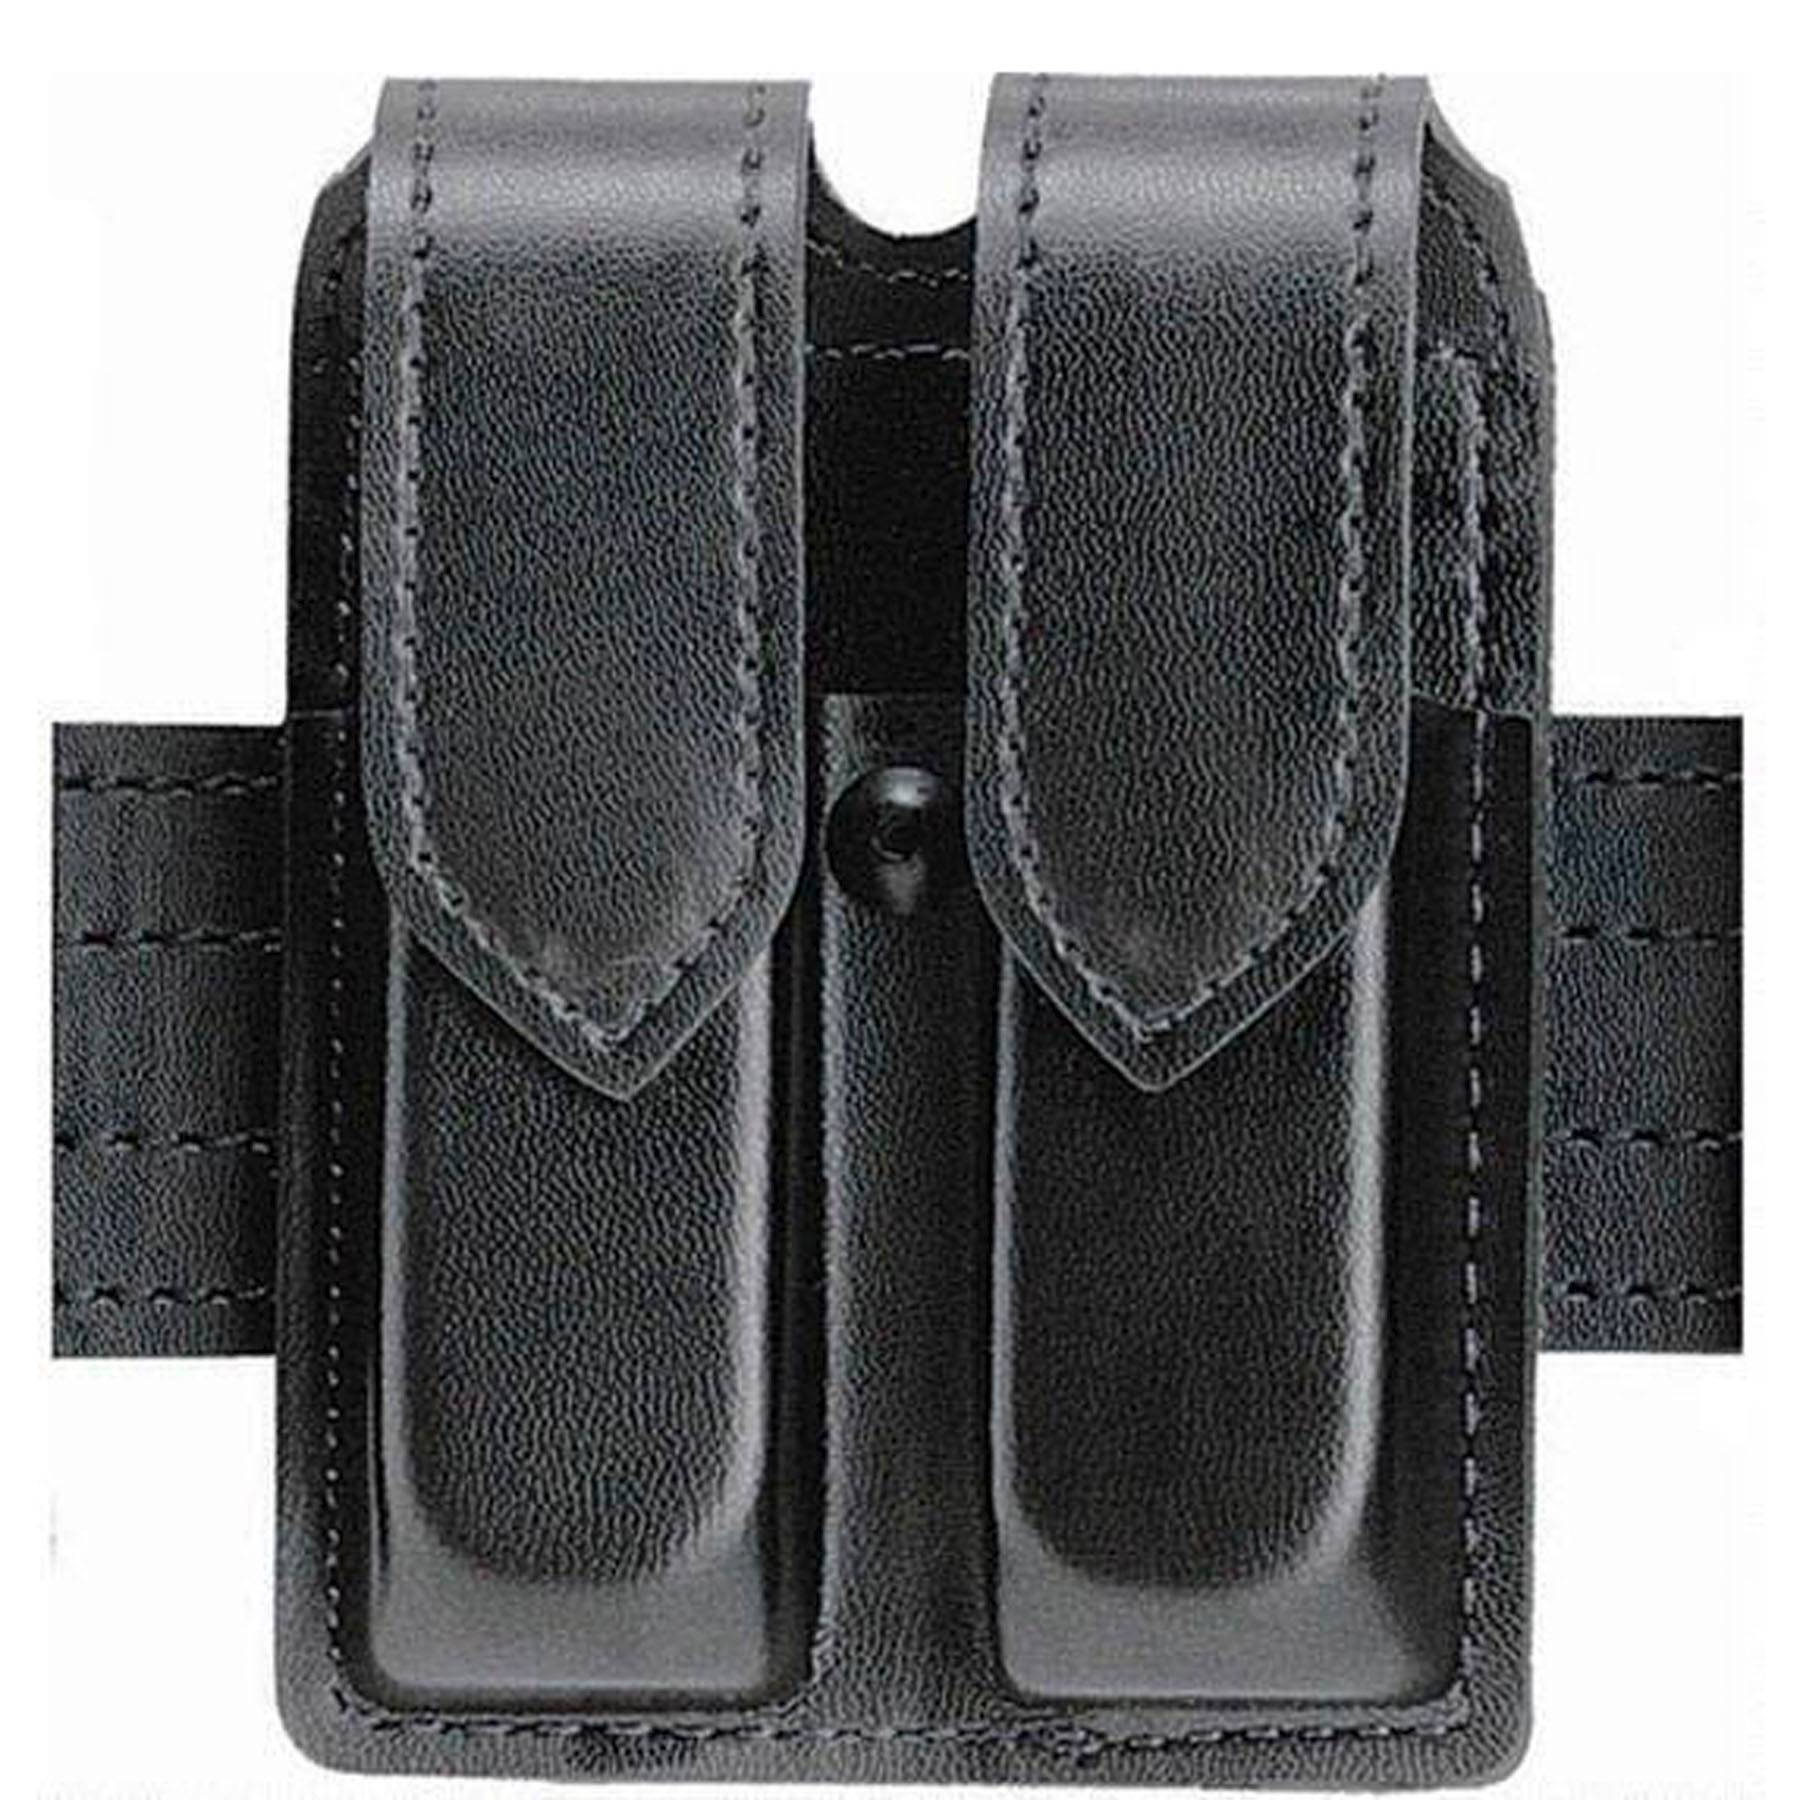 1 Safariland 77 Double Mag Magazine Snap Pouch for Glock 20/21 **Light Wear** 